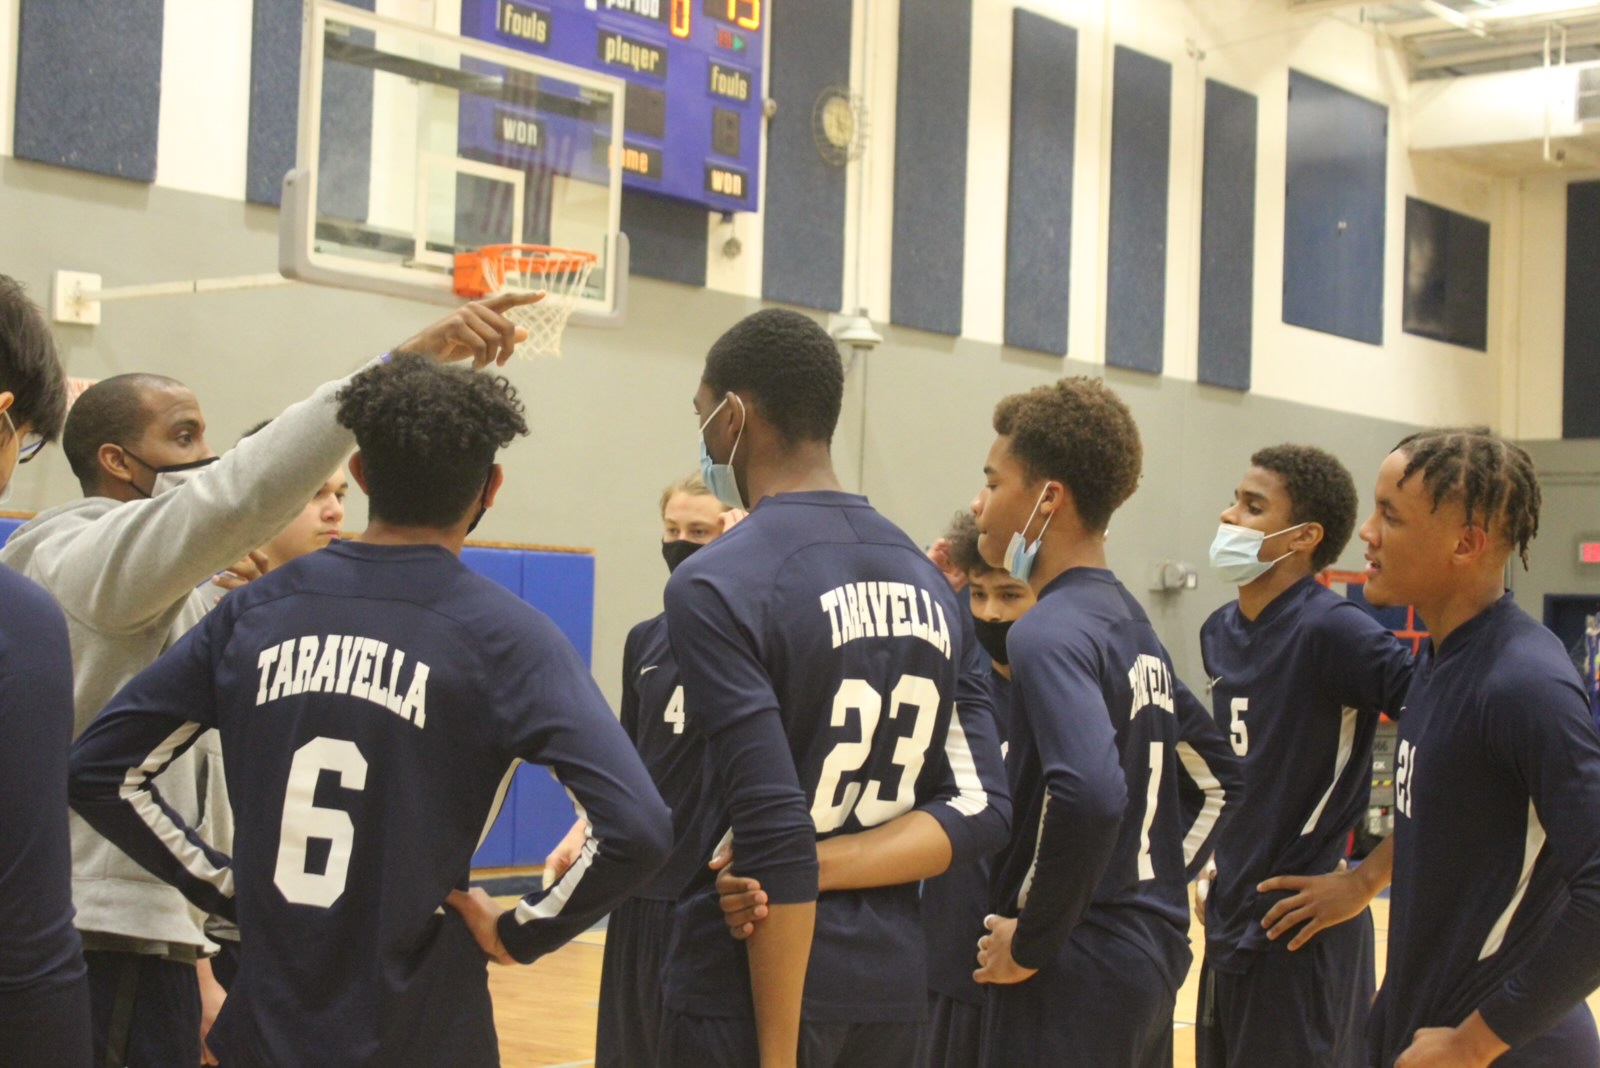 J.P. Taravella Boys Volleyball Wins in 4 Sets Prior to Playoffs